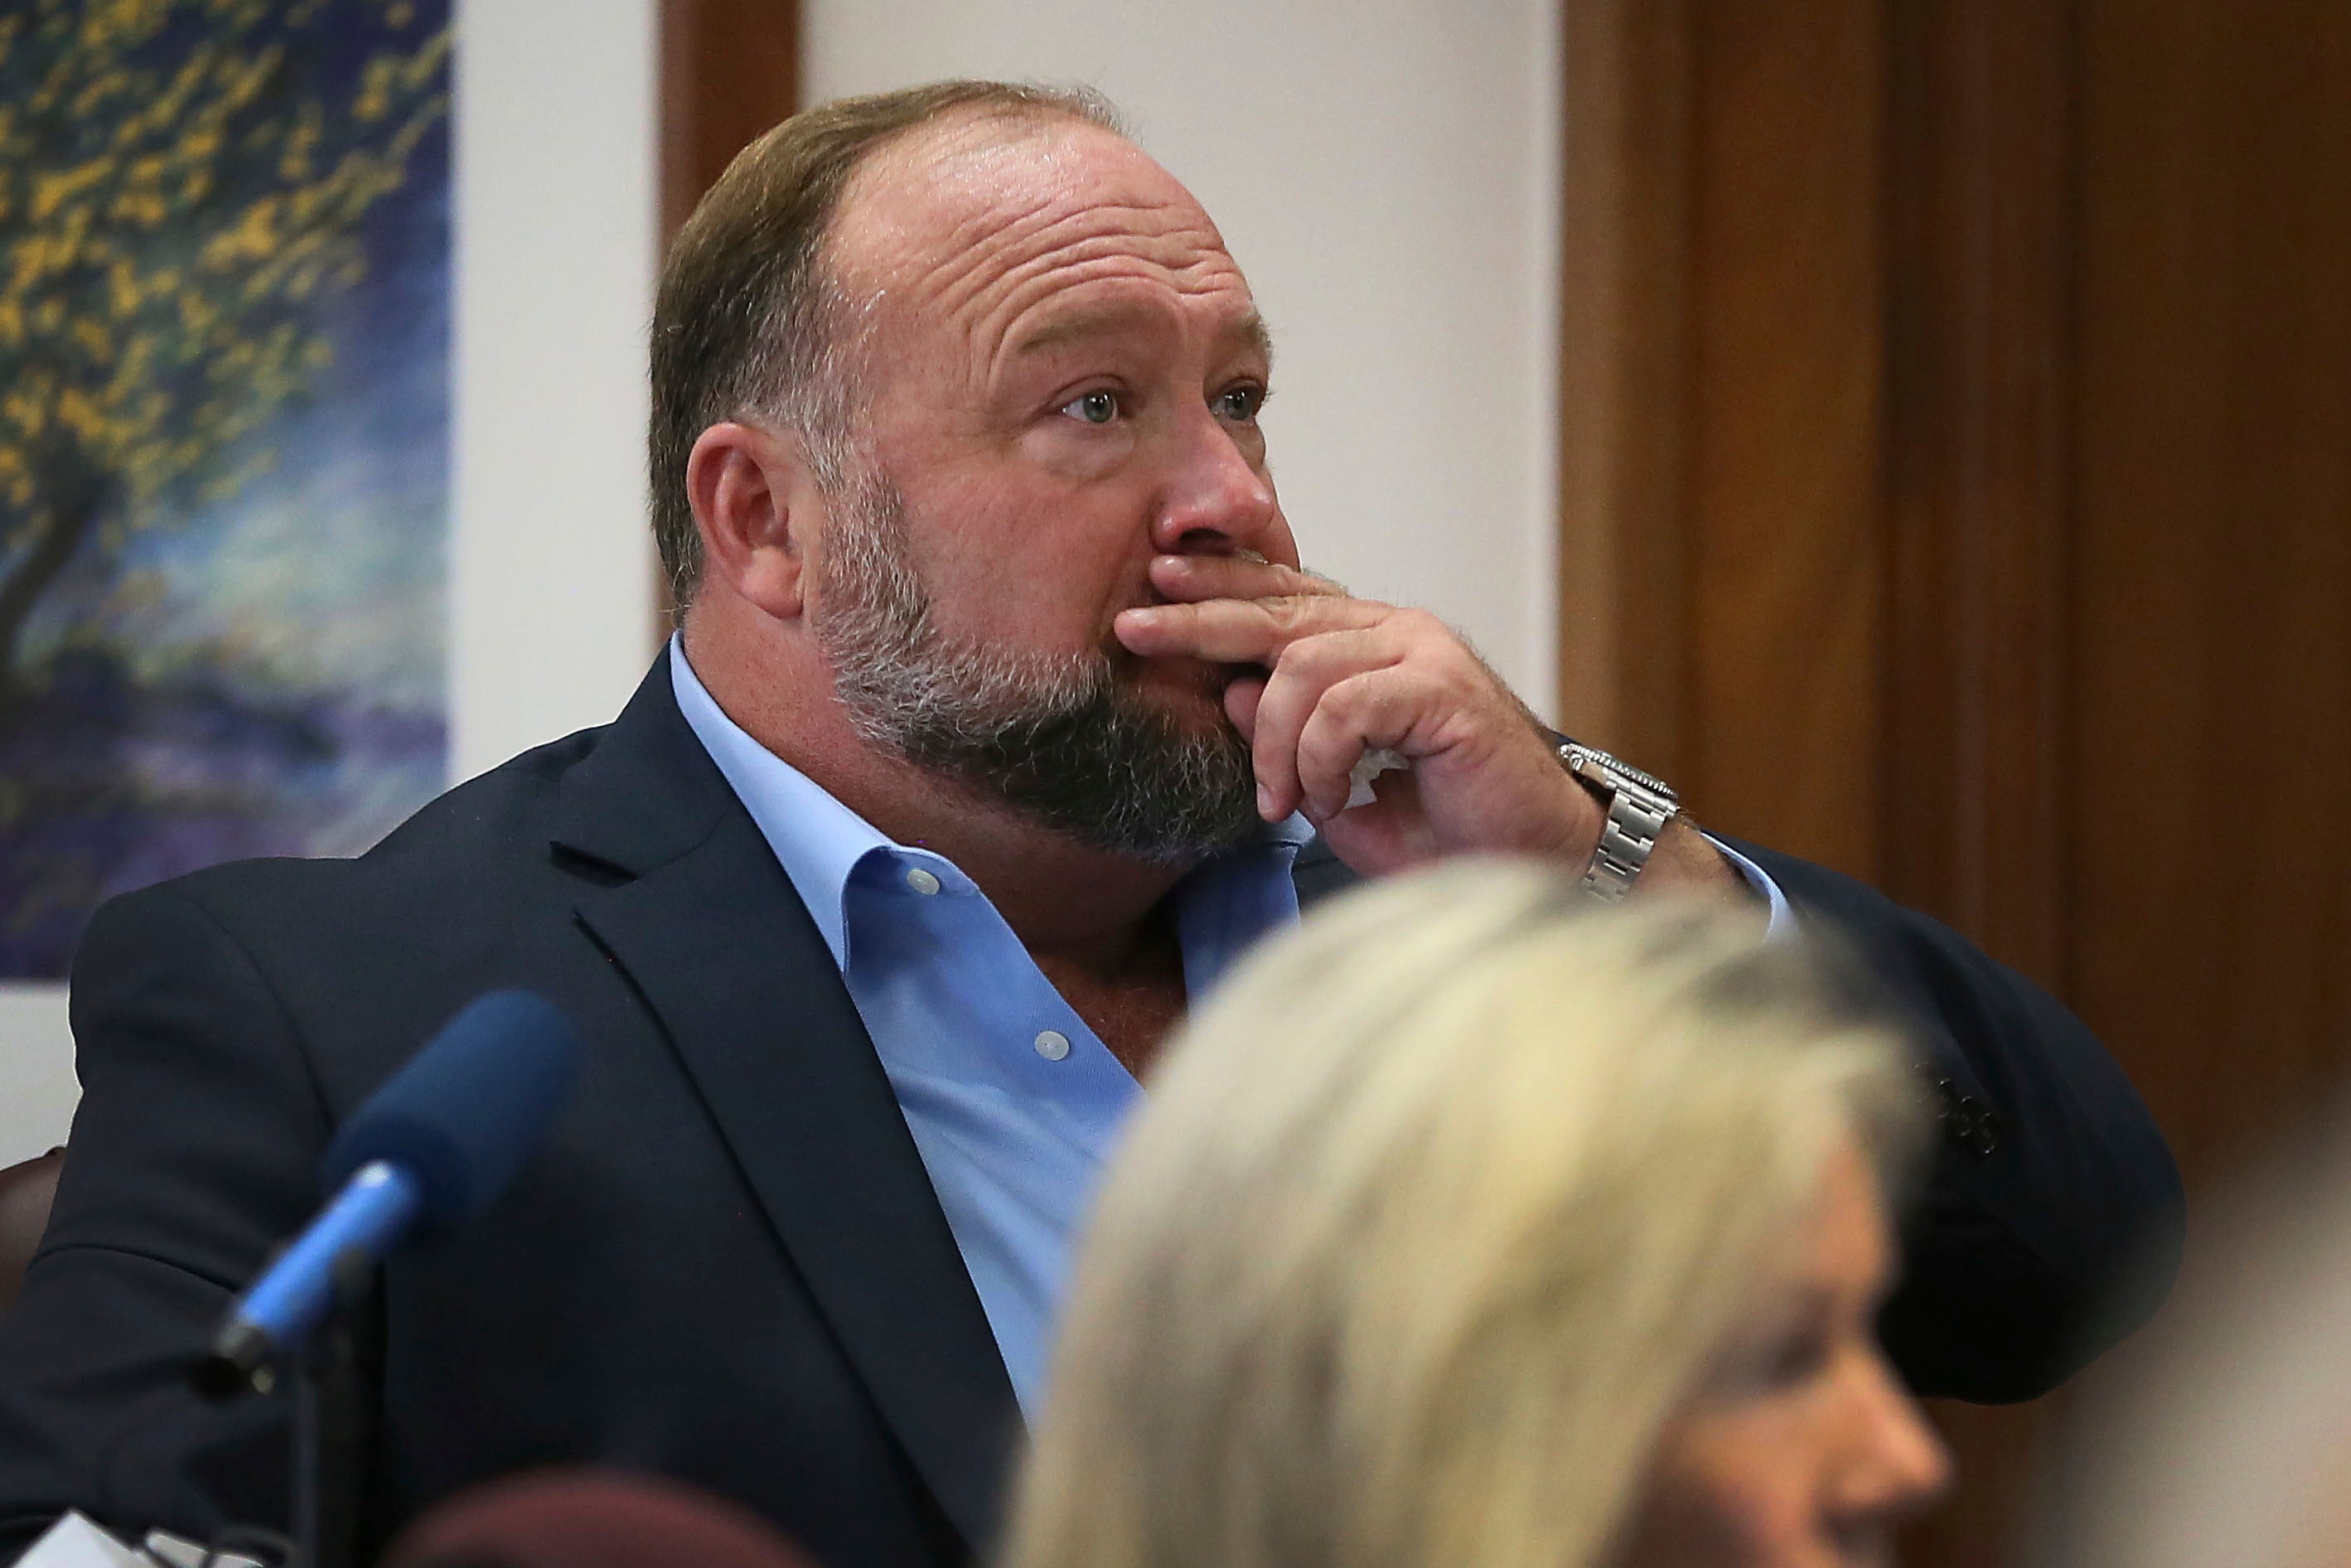 Alex Jones under questioning at his defamation trial atTravis County Courthouse in Austin on 3 August